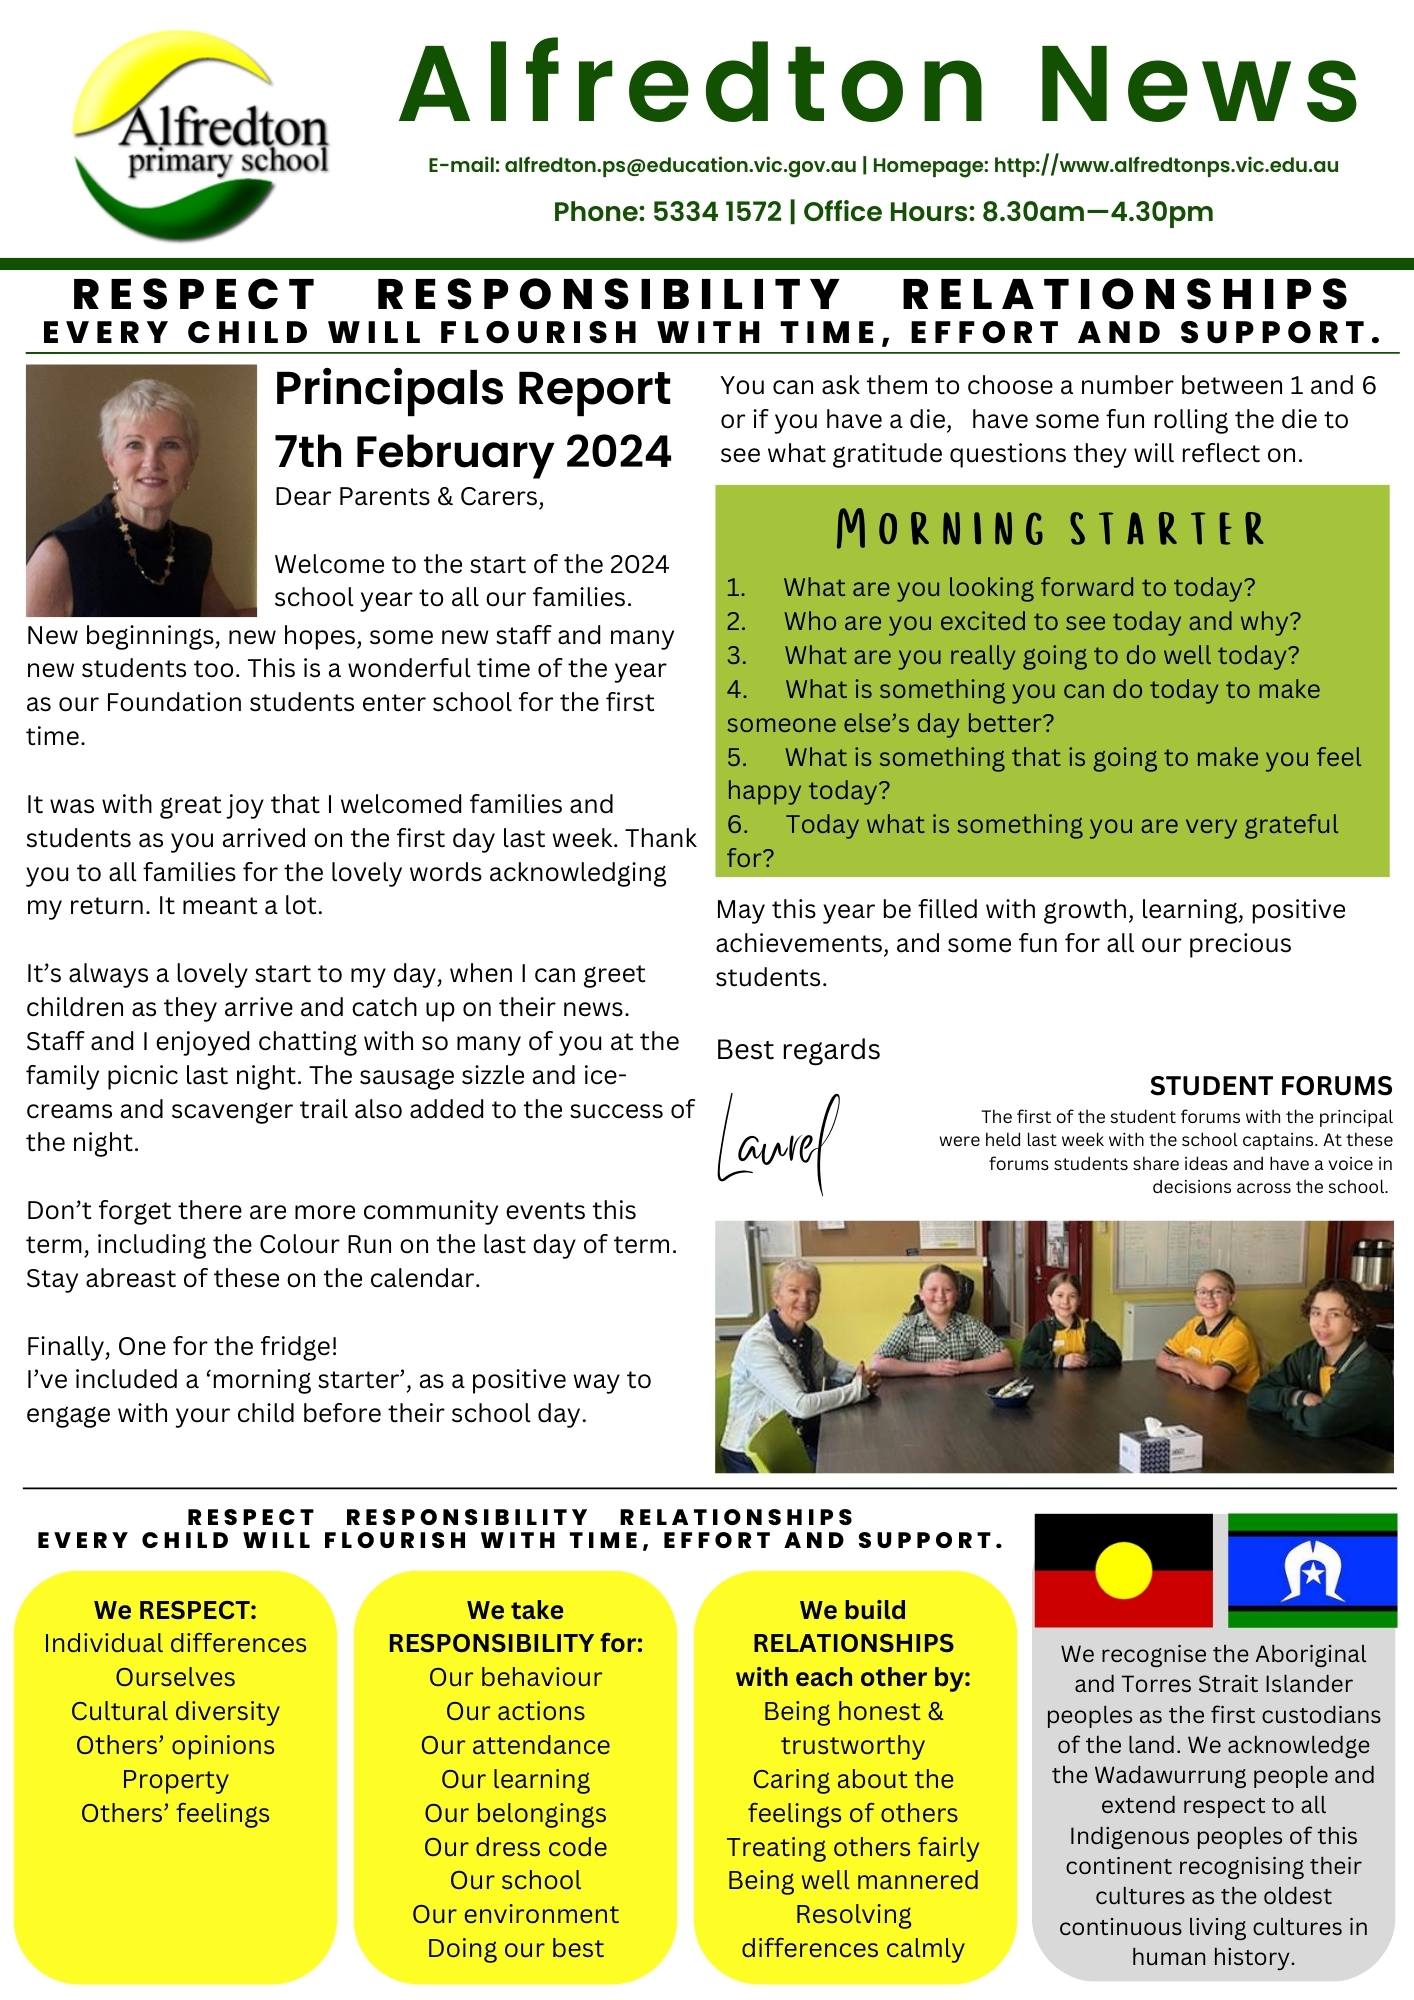 First Page of the February 7th newsletter